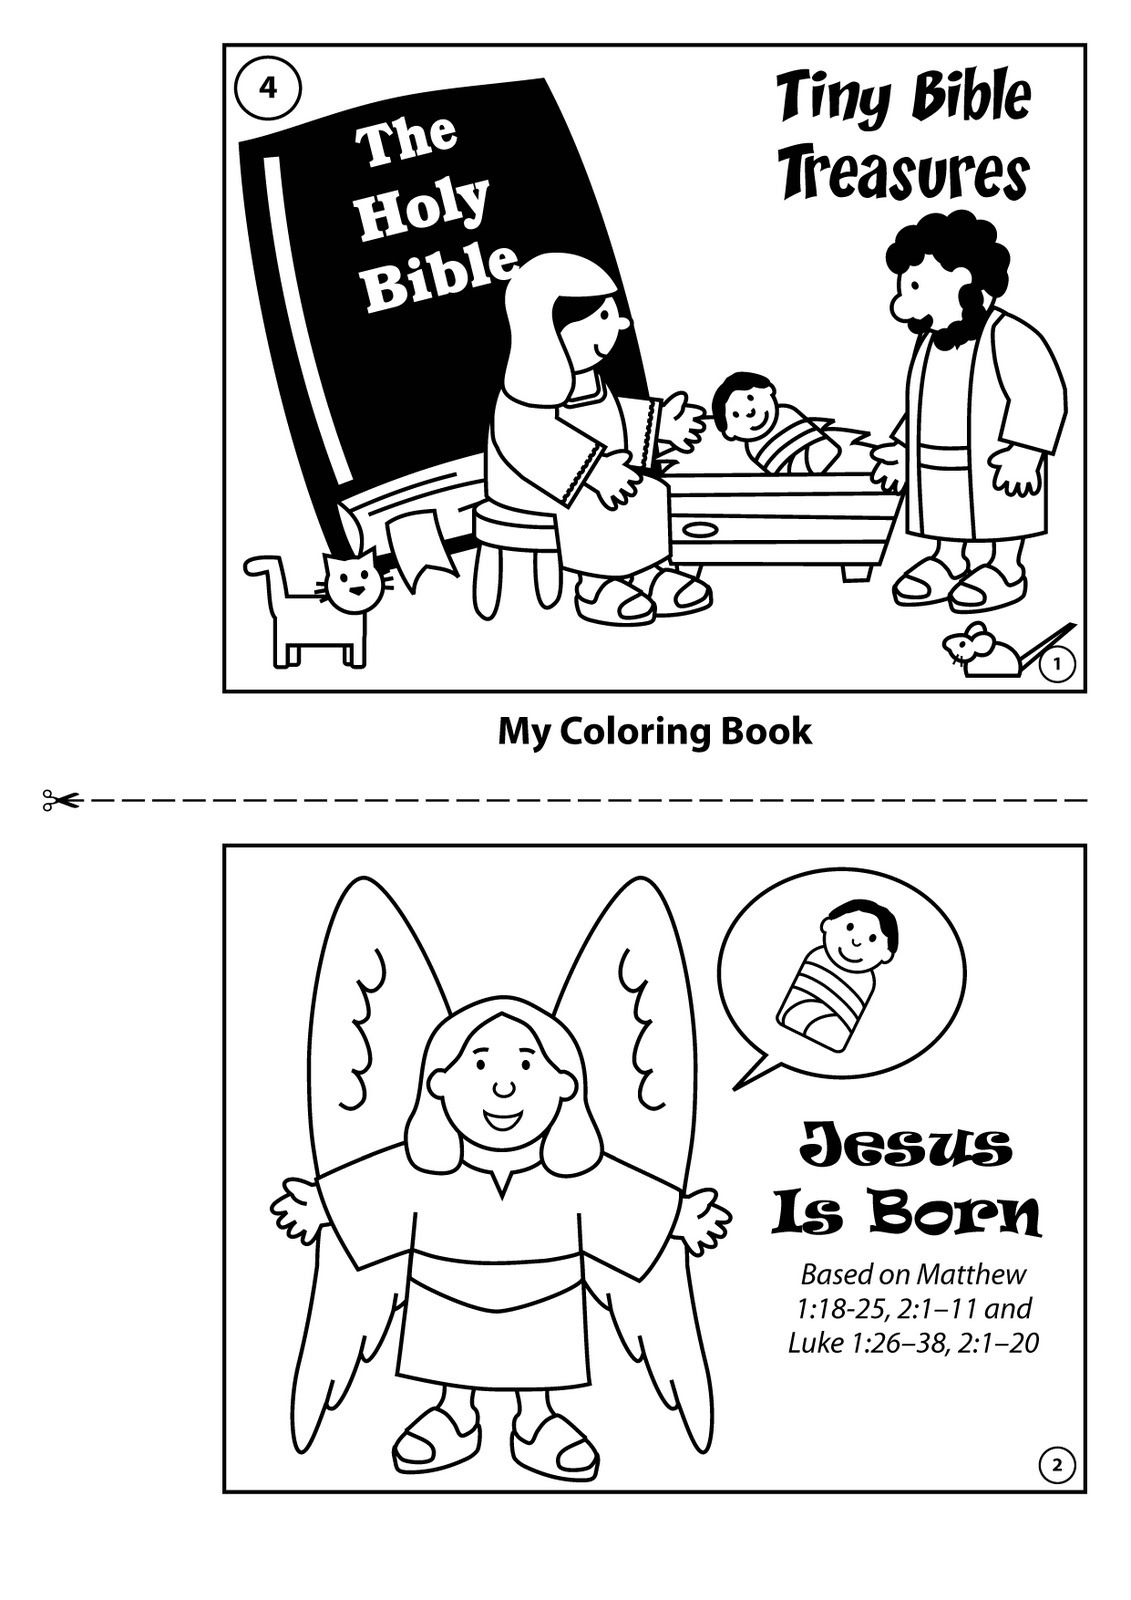 [Jesus%2520is%2520born_coloring%2520book_Page_01%255B2%255D.jpg]